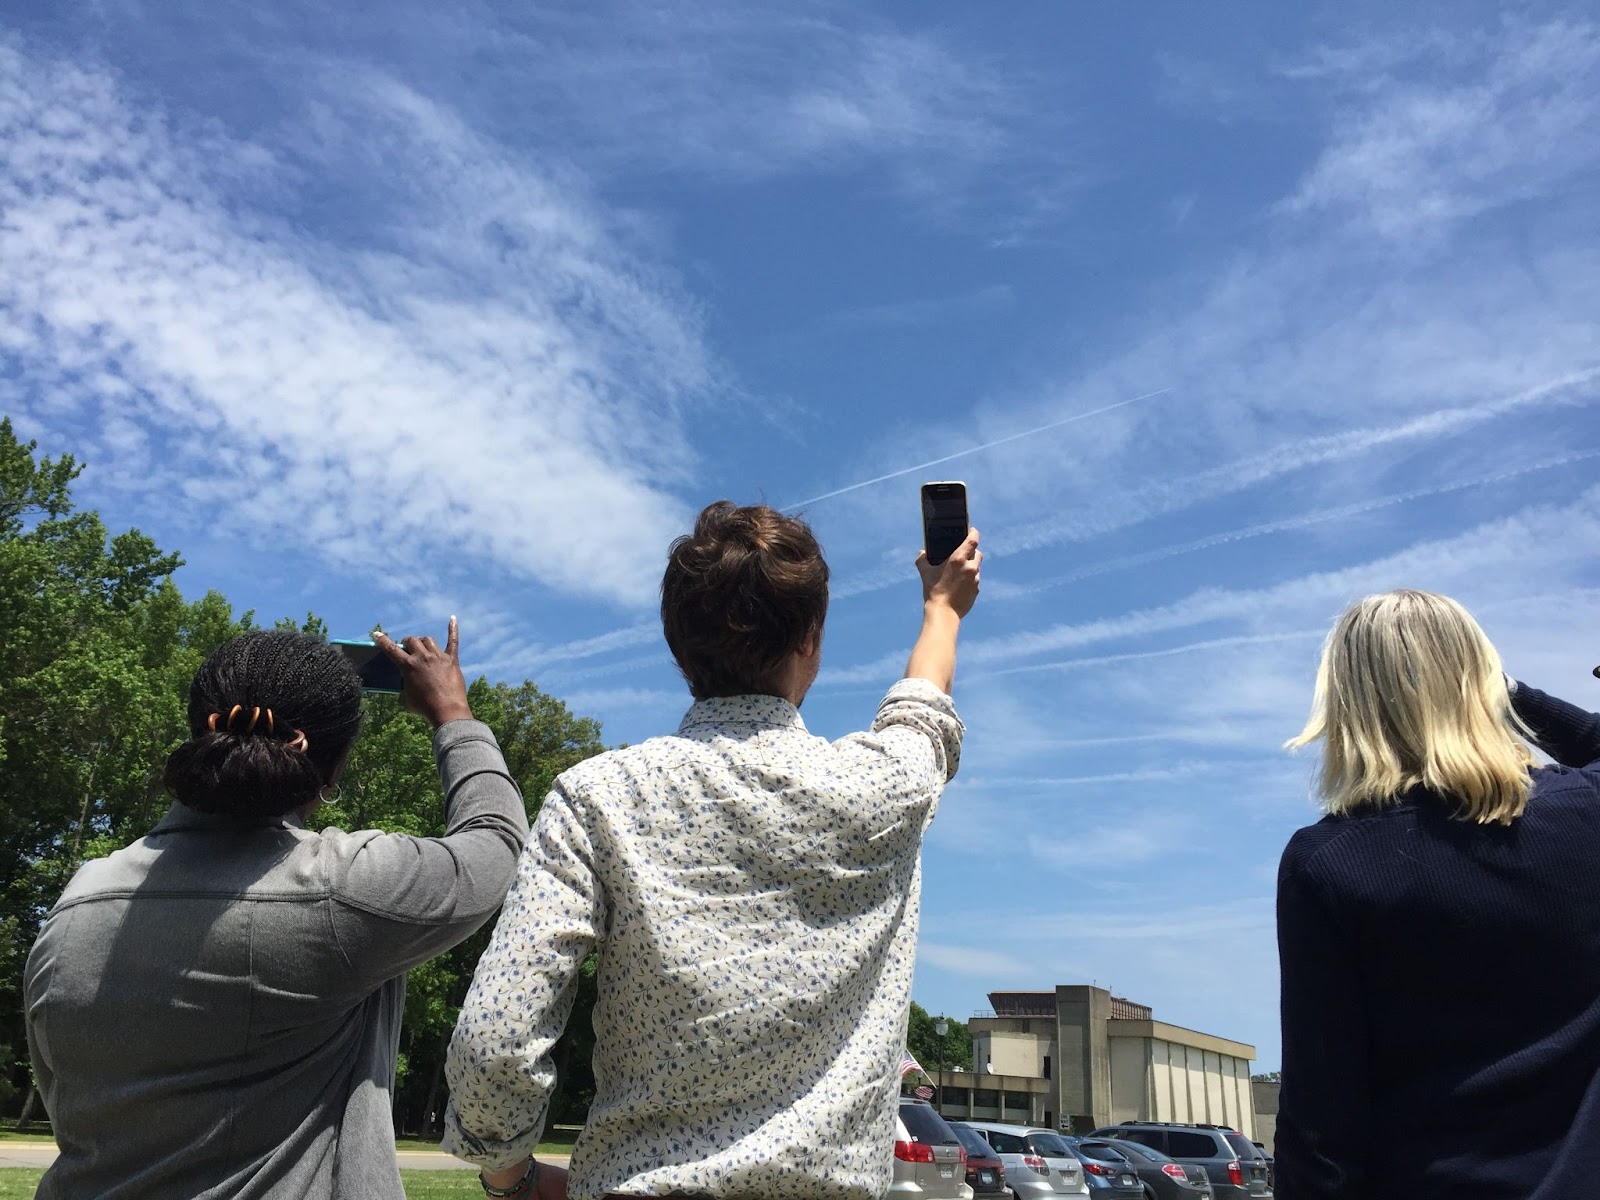 The image has three people, one with braids and dark skin holding a phone, the second has short brown hair and light skin also holding a phone, and the third person has long white hair. All three people are looking at a cloudy sky with contrails and thin cirrus clouds.